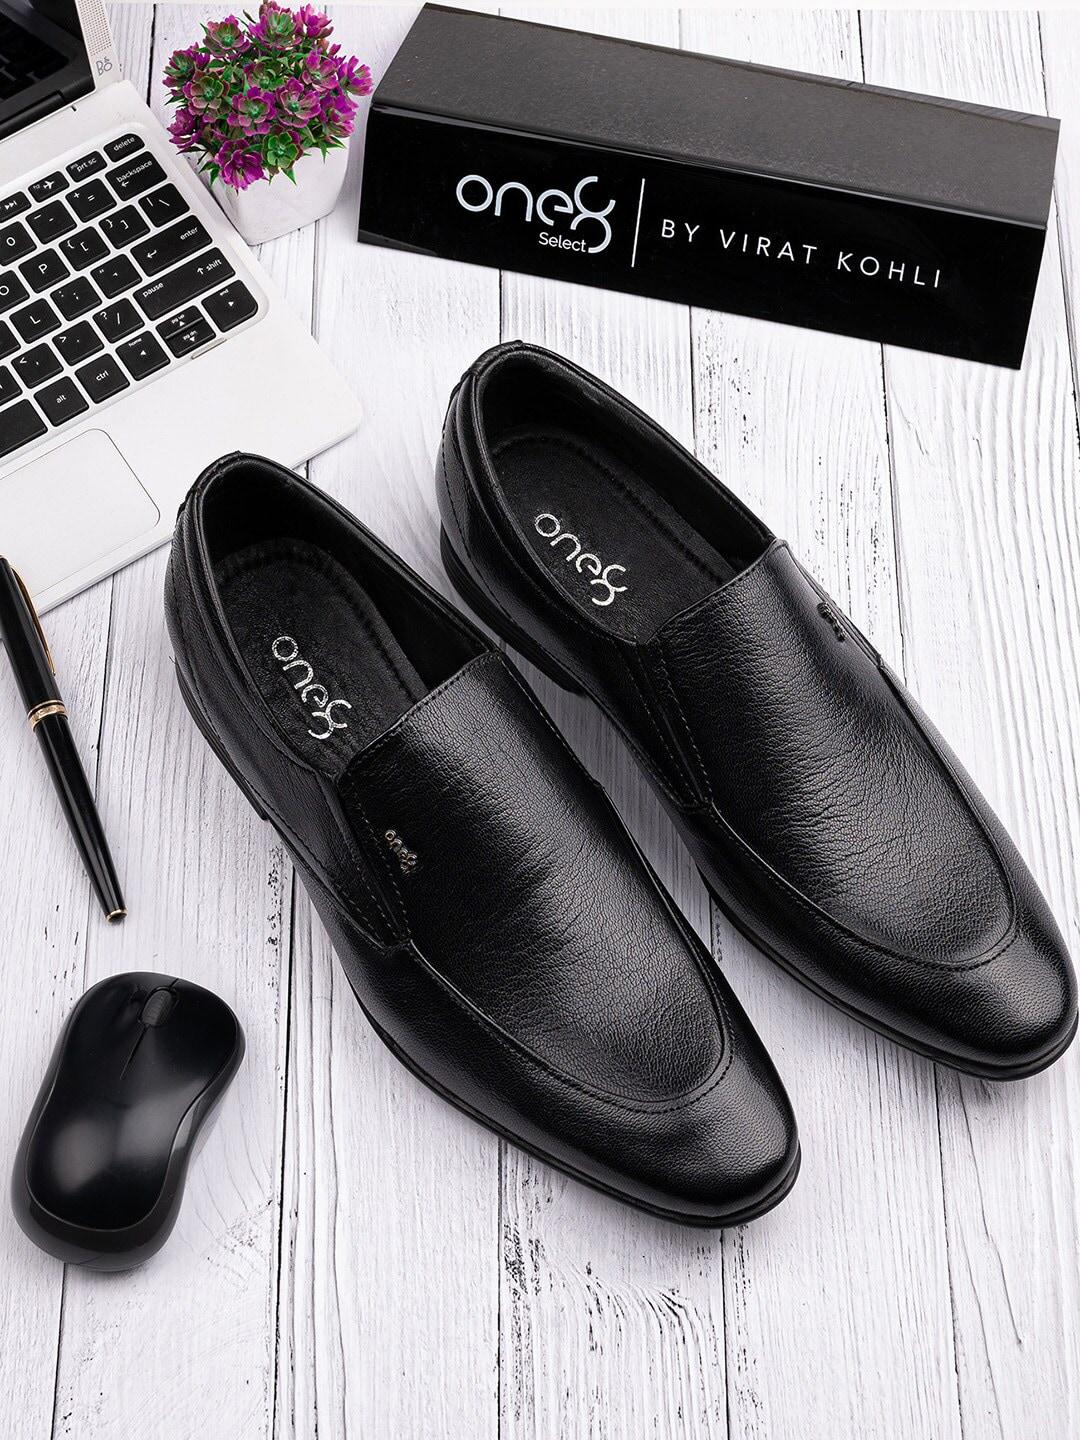 one8 men textured leather formal slip-on shoes